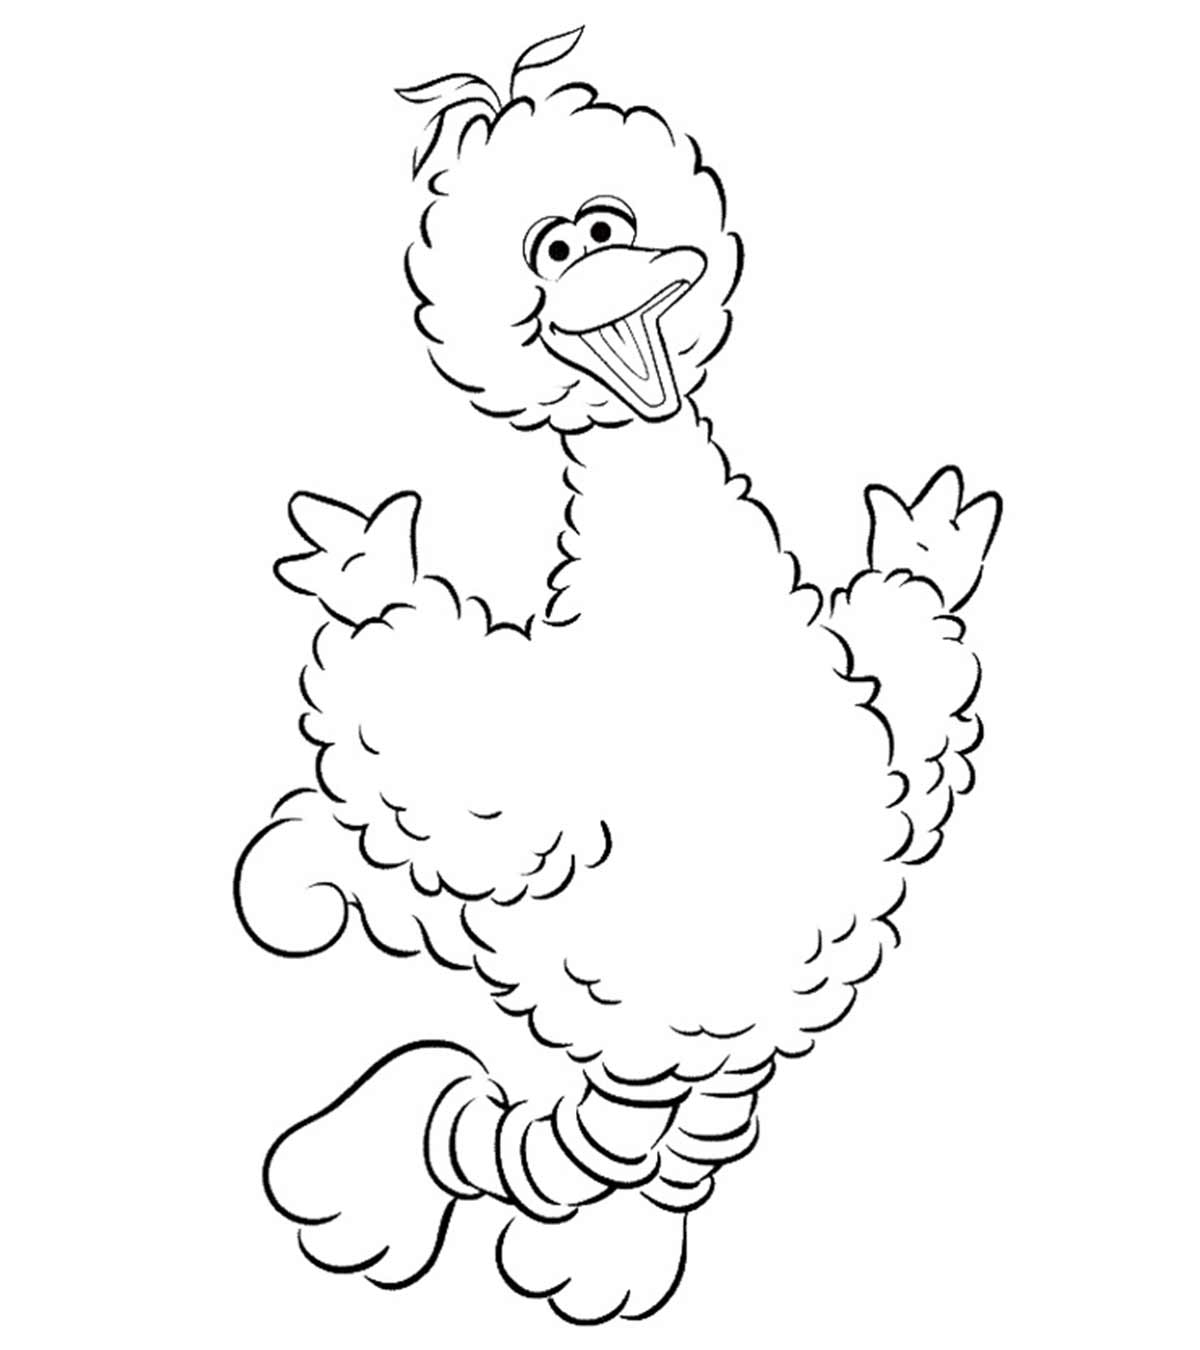 Top 25 Colorful Big Bird Coloring Pages For Your Little One_image